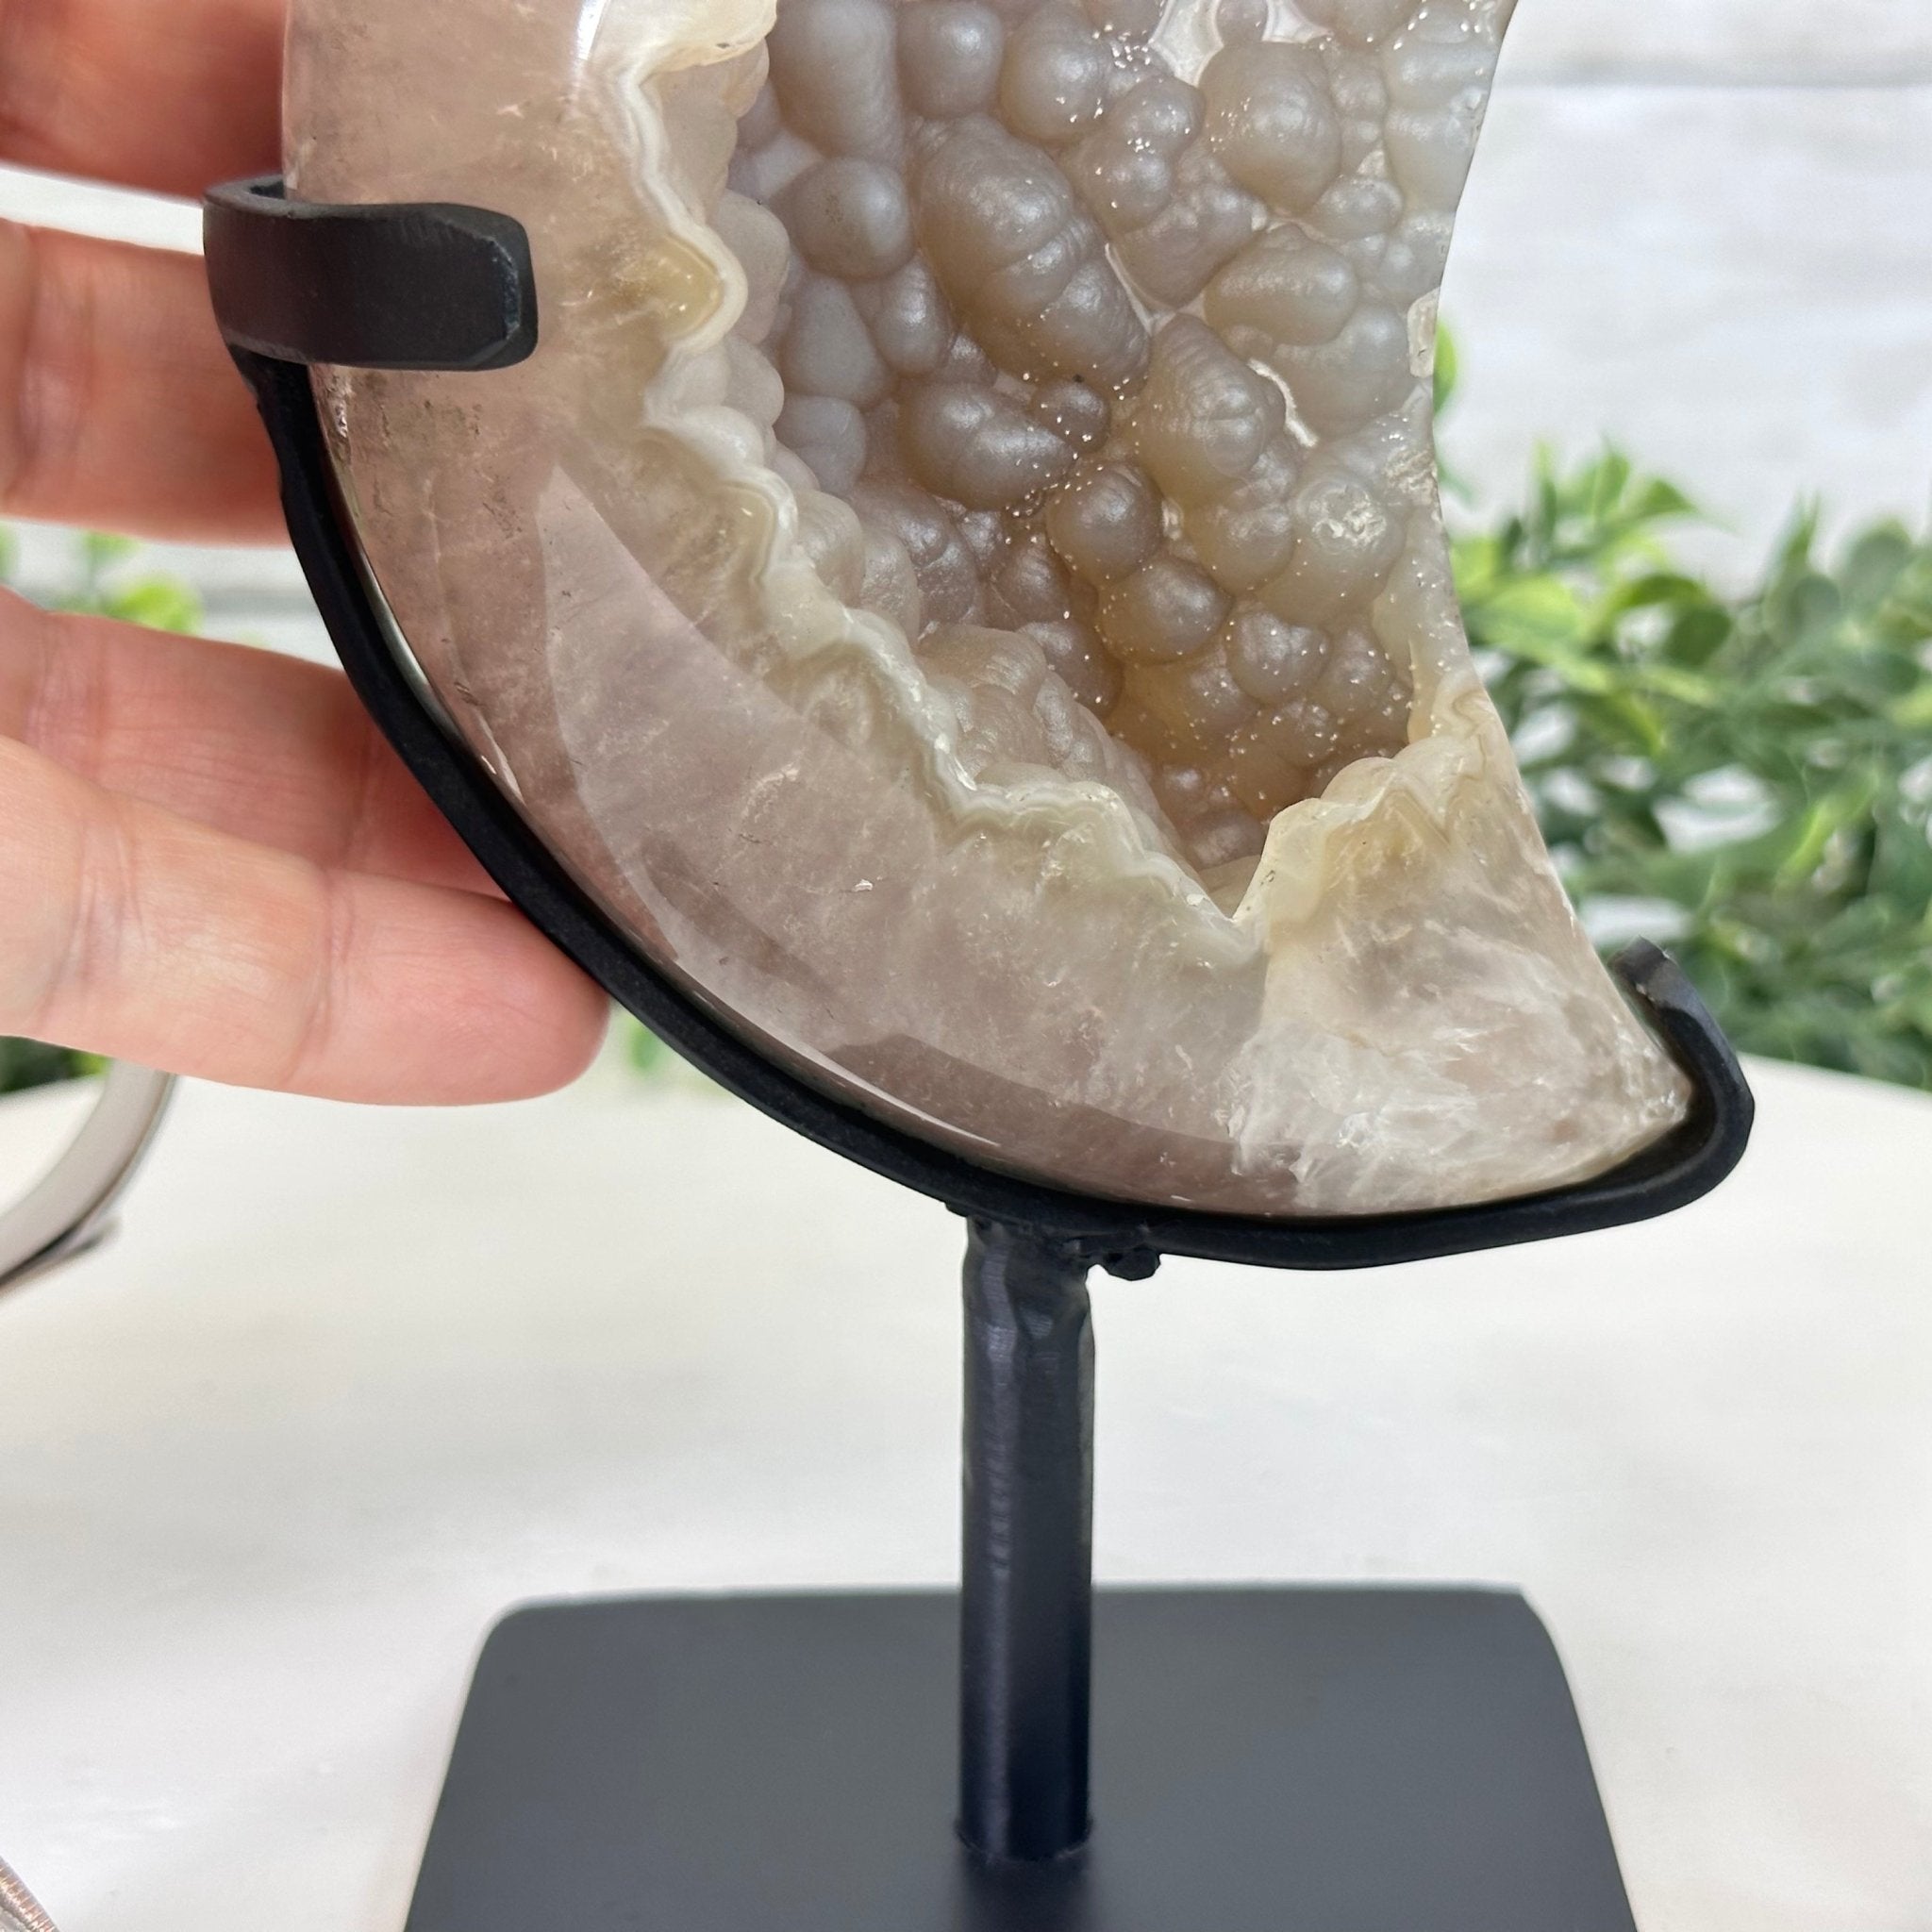 Polished Agate Crescent Moon on a Stand, 2.7 lbs & 7.75" Tall #5740NA-001 - Brazil GemsBrazil GemsPolished Agate Crescent Moon on a Stand, 2.7 lbs & 7.75" Tall #5740NA-001Crescent Moons5740NA-001